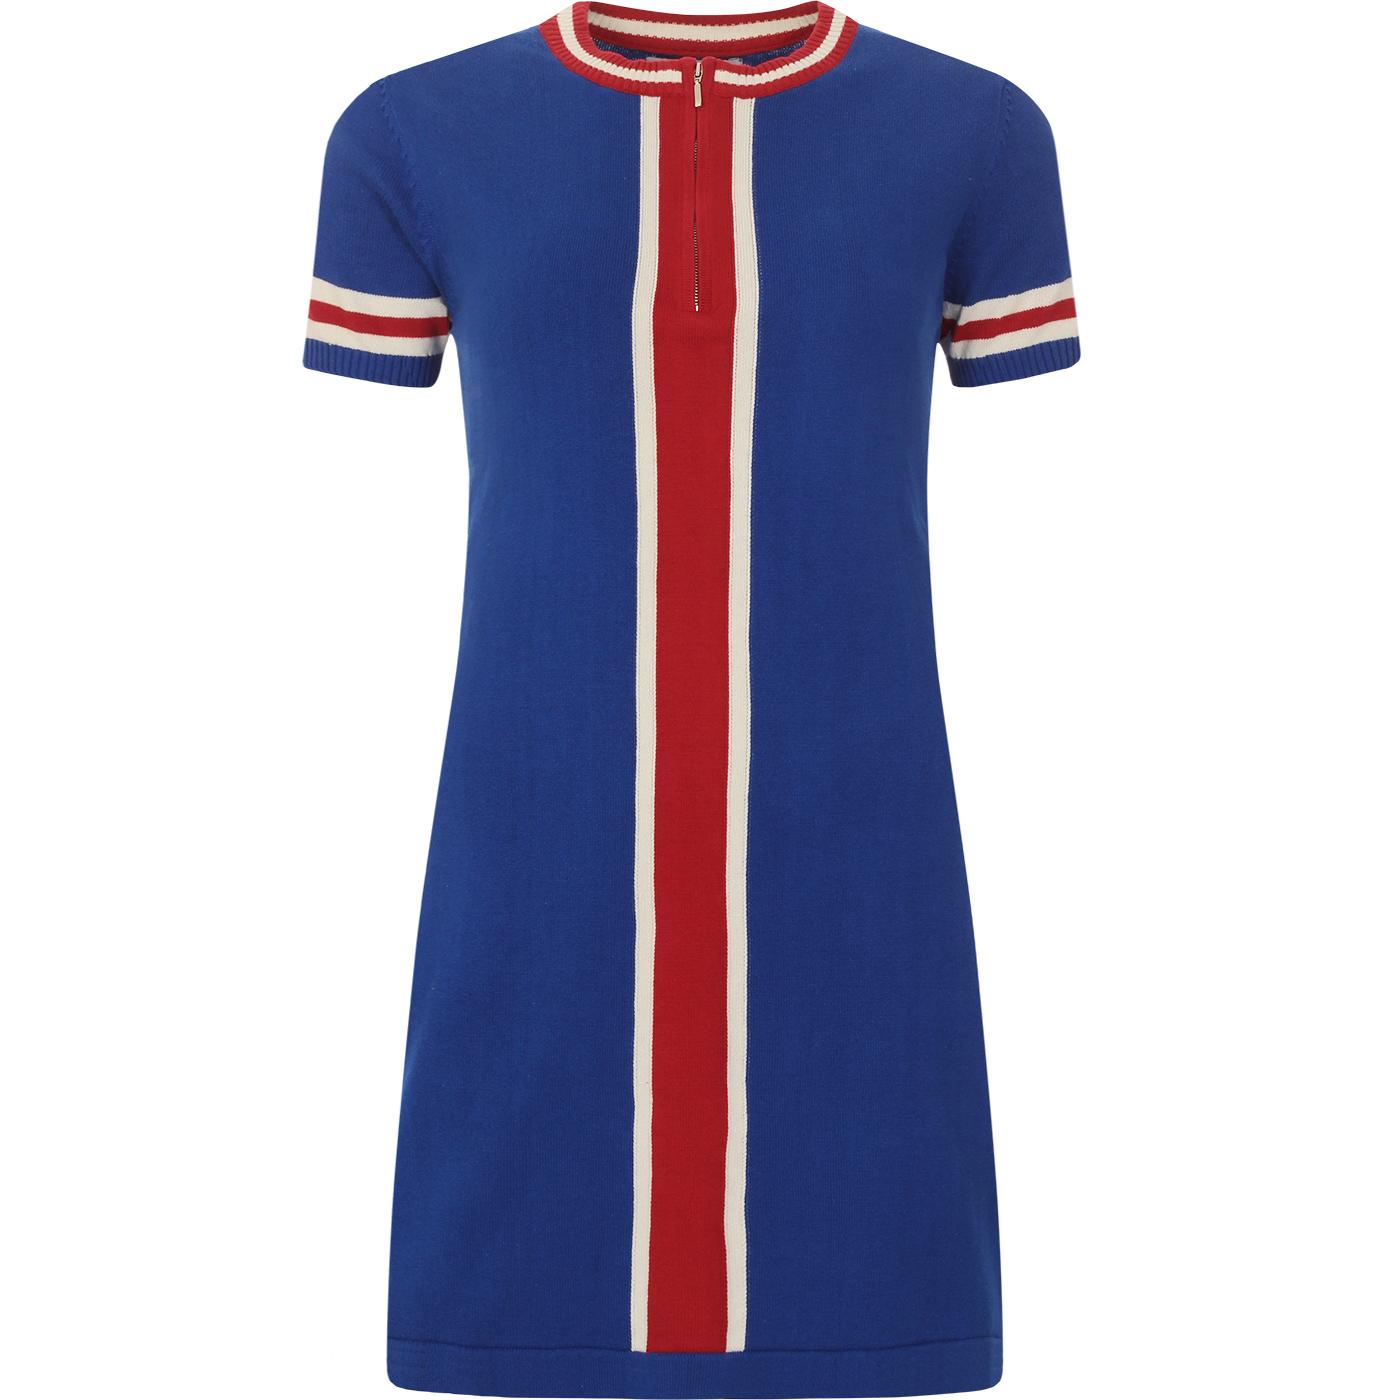 Madcap England Retro Mod 1960s Knitted Cycling Top Dress in Blue and Red